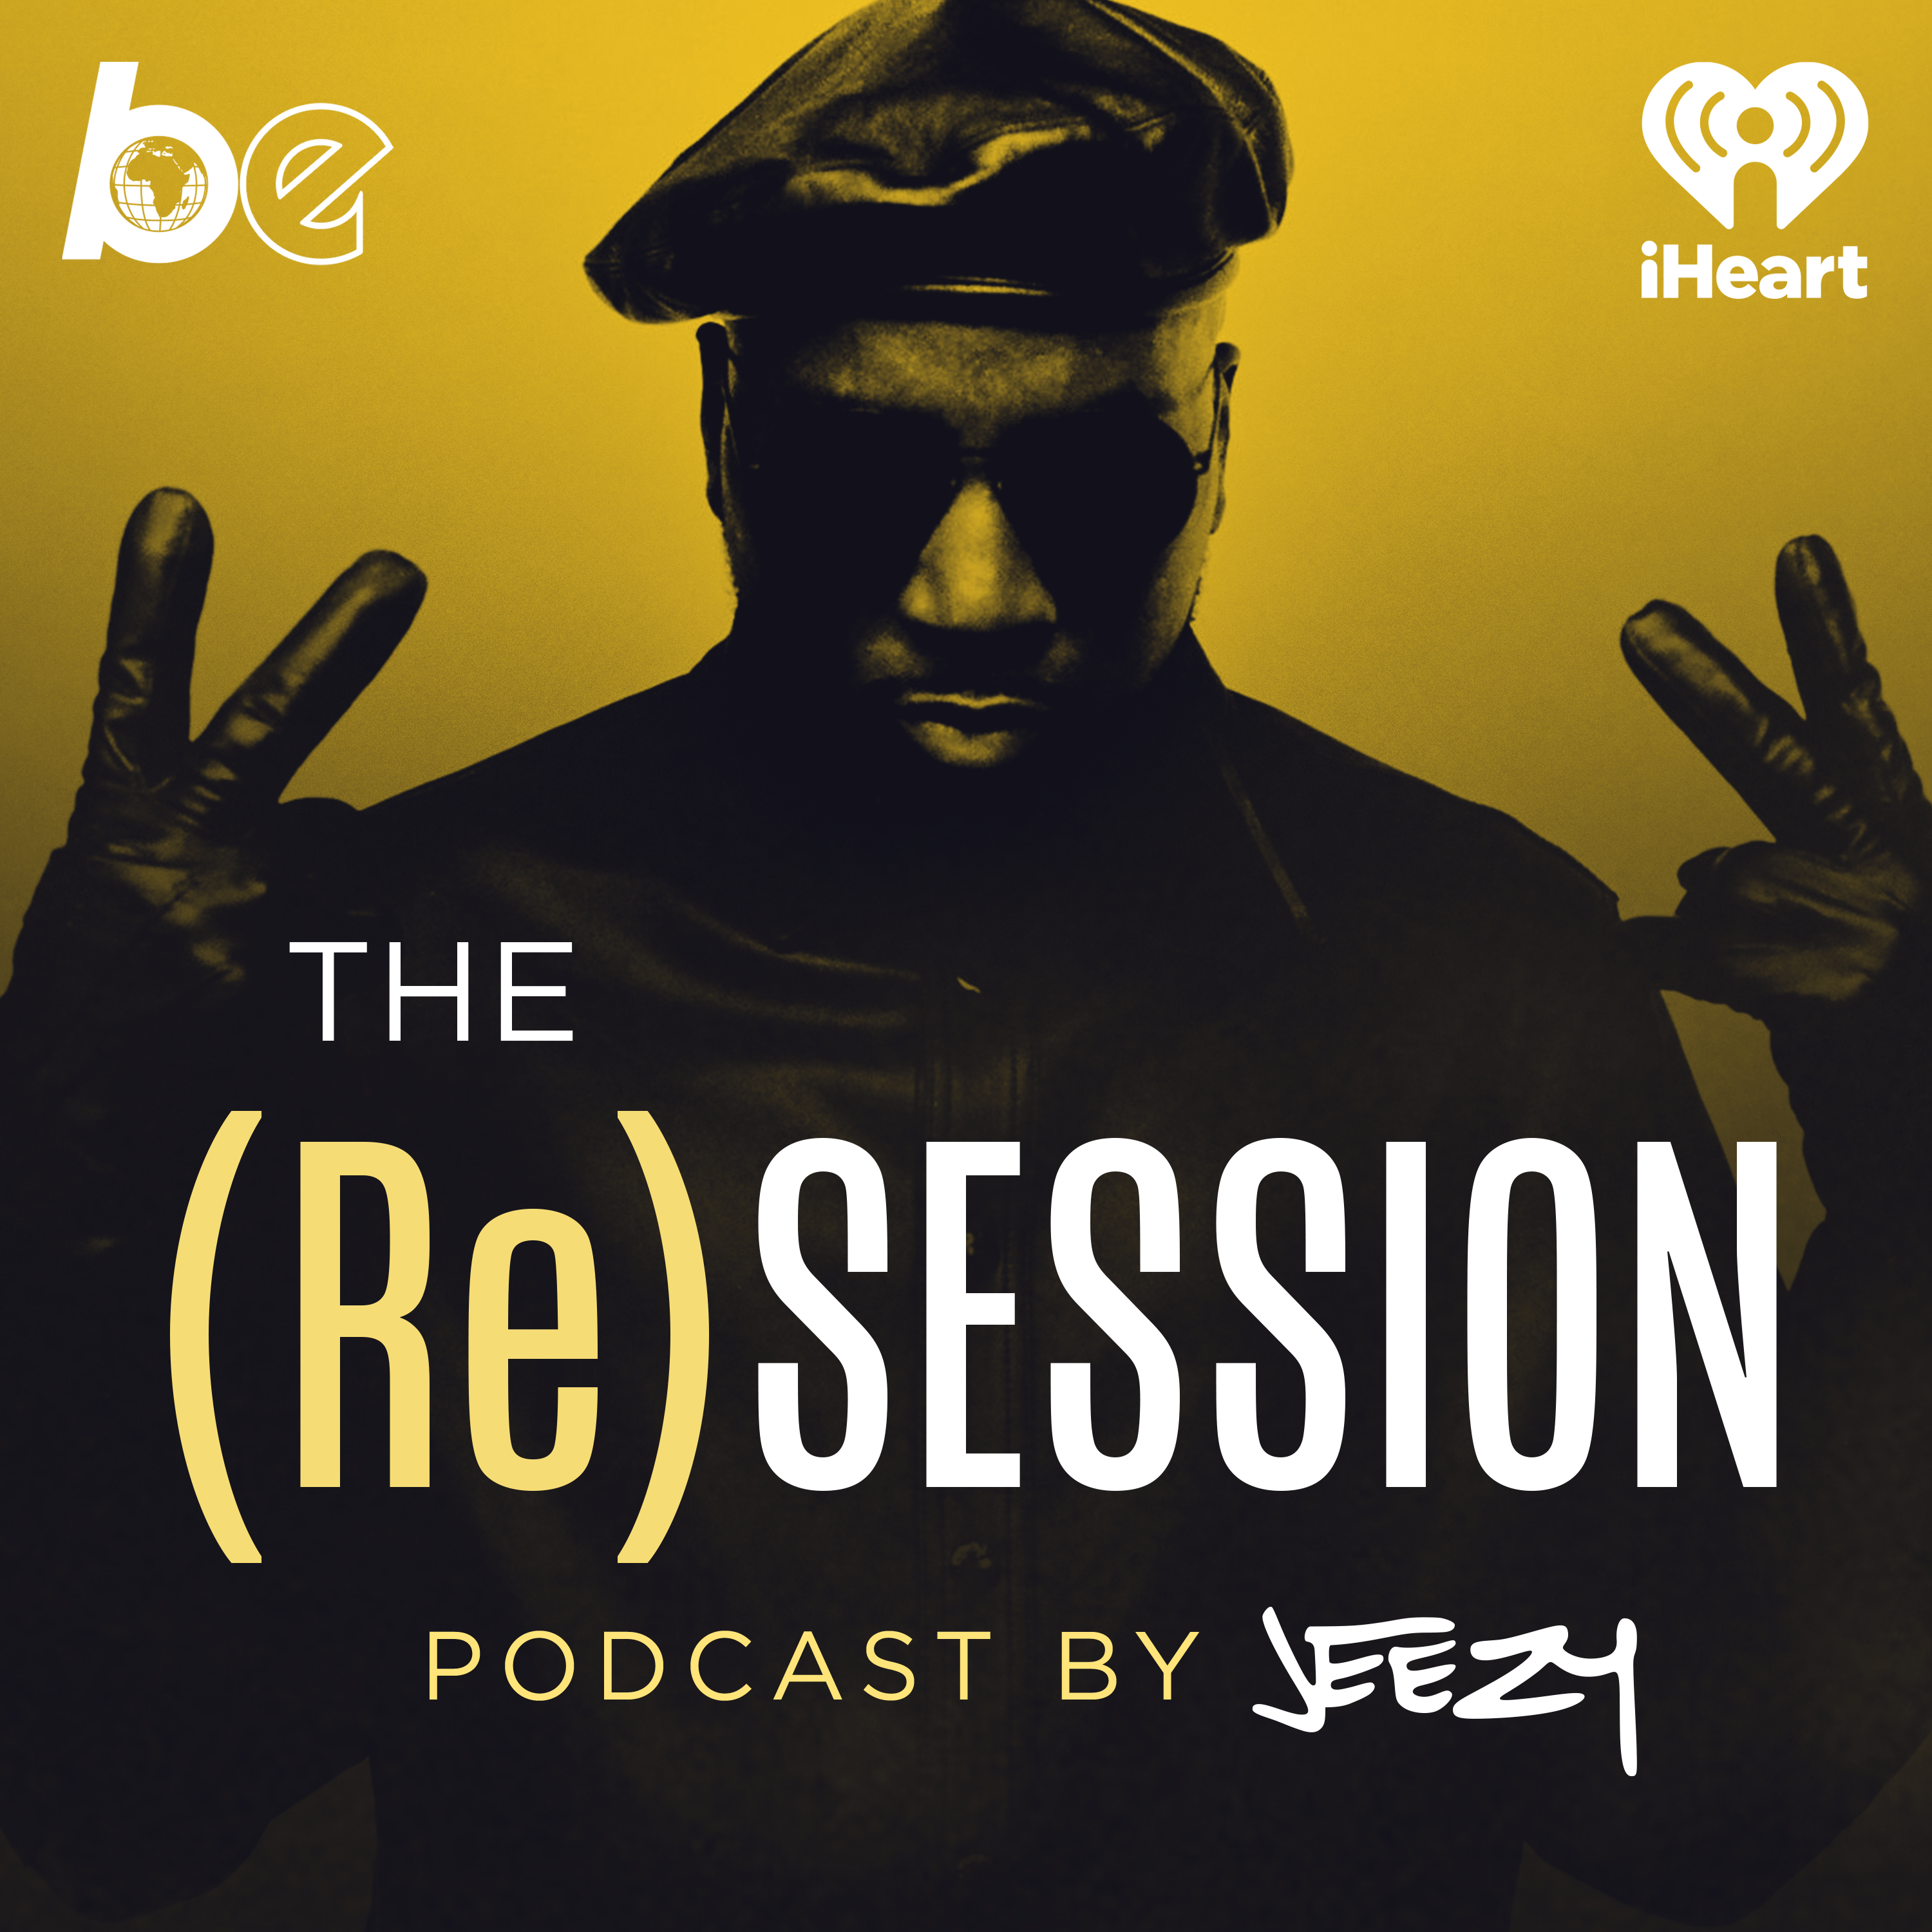 Dr. Jess on Mental Health | Ep 3 | (Re)Session Podcast by Jeezy